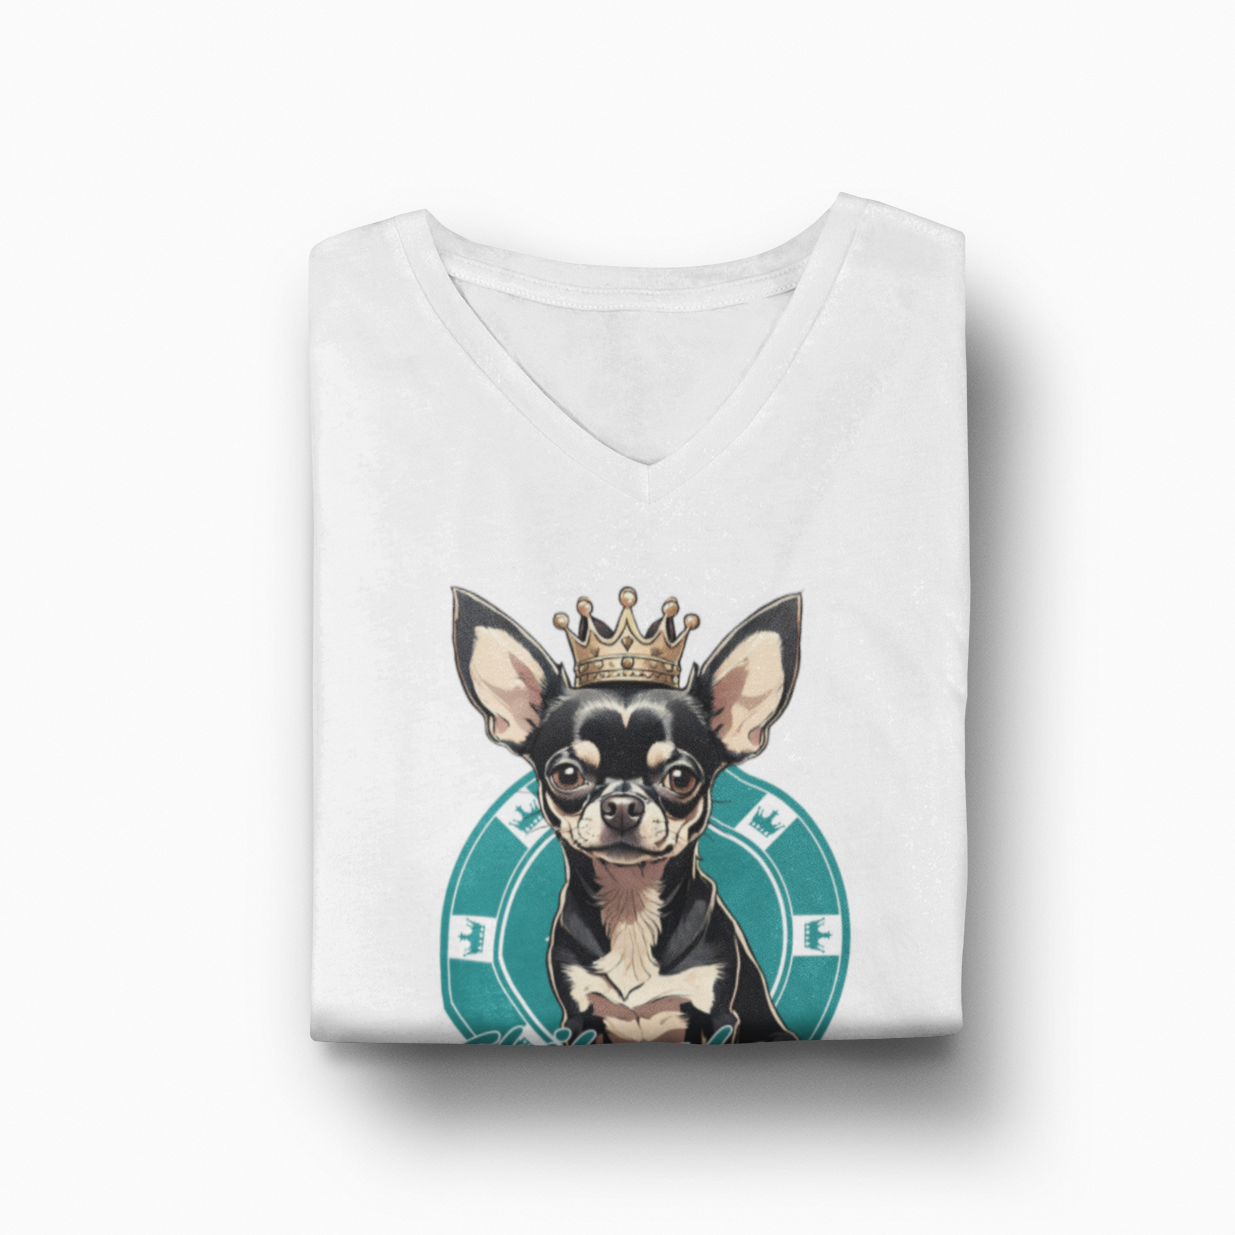 Unisex Jersey Short Sleeve V-Neck Tee with Cute Crowned Chihuahua - Mockup Folded